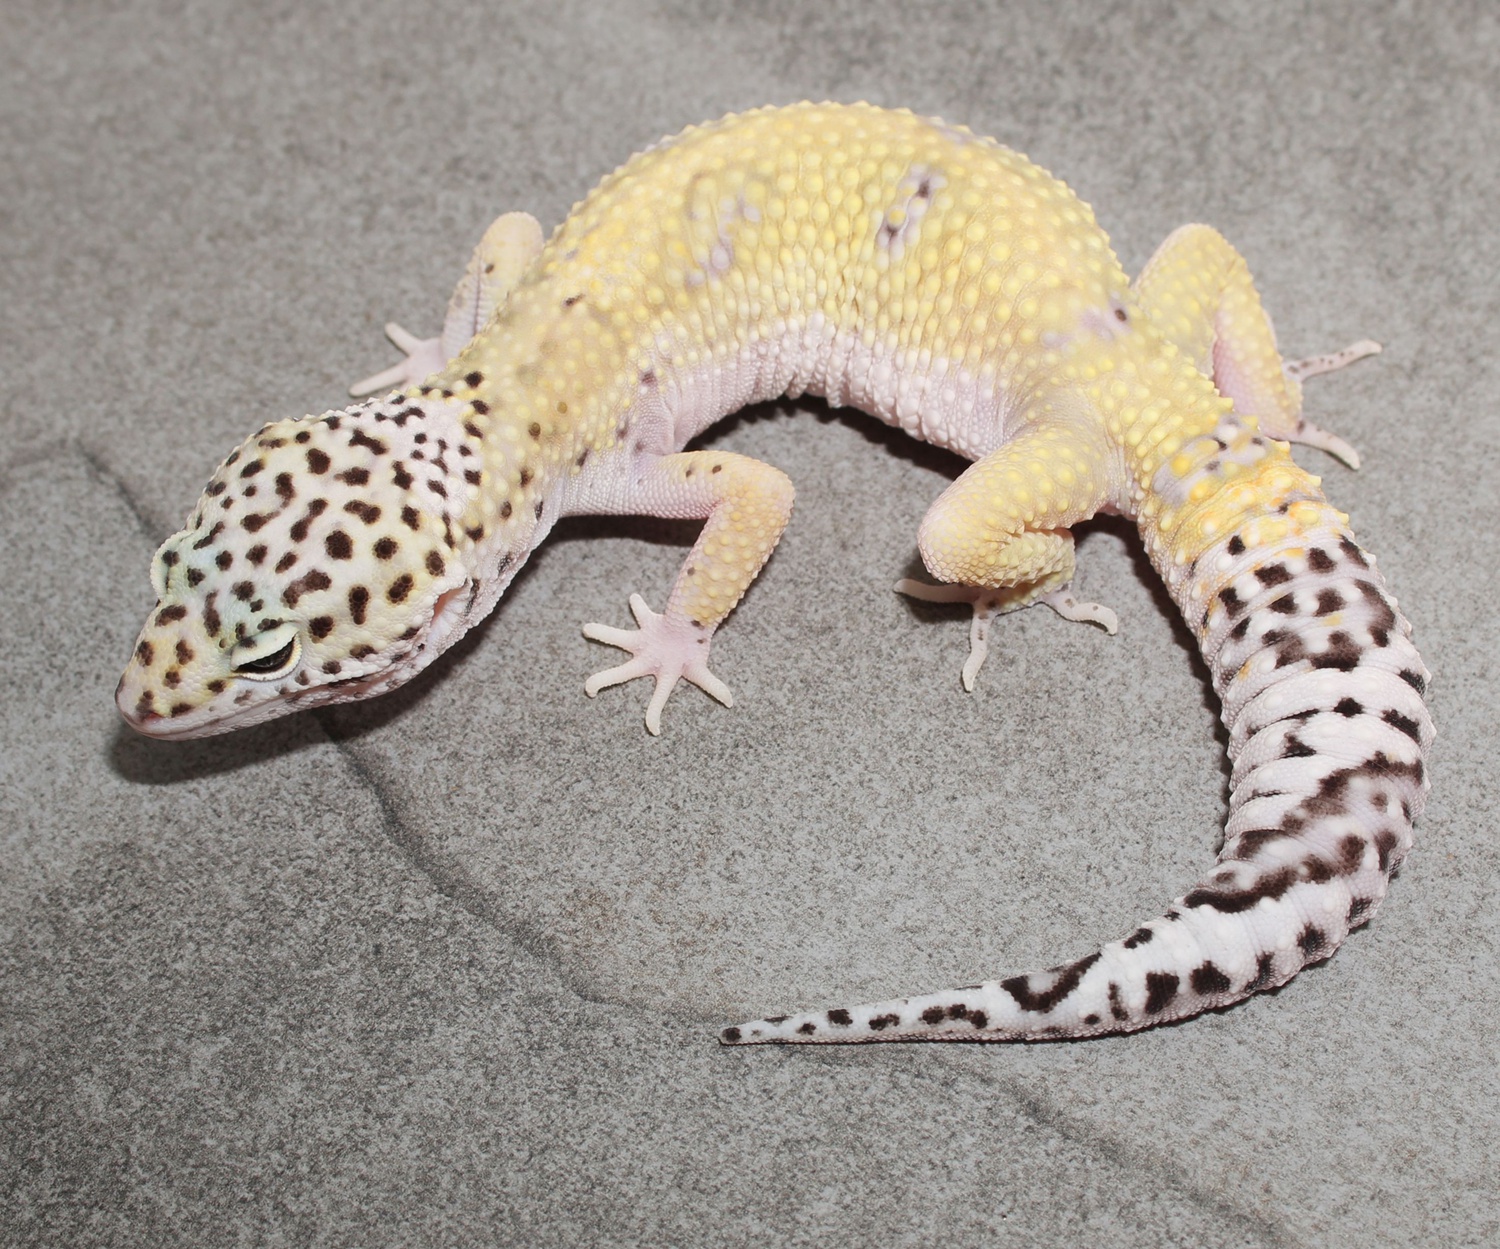 Albey Snow Ghost Het Eclipse Leopard Gecko by Impeccable Gecko